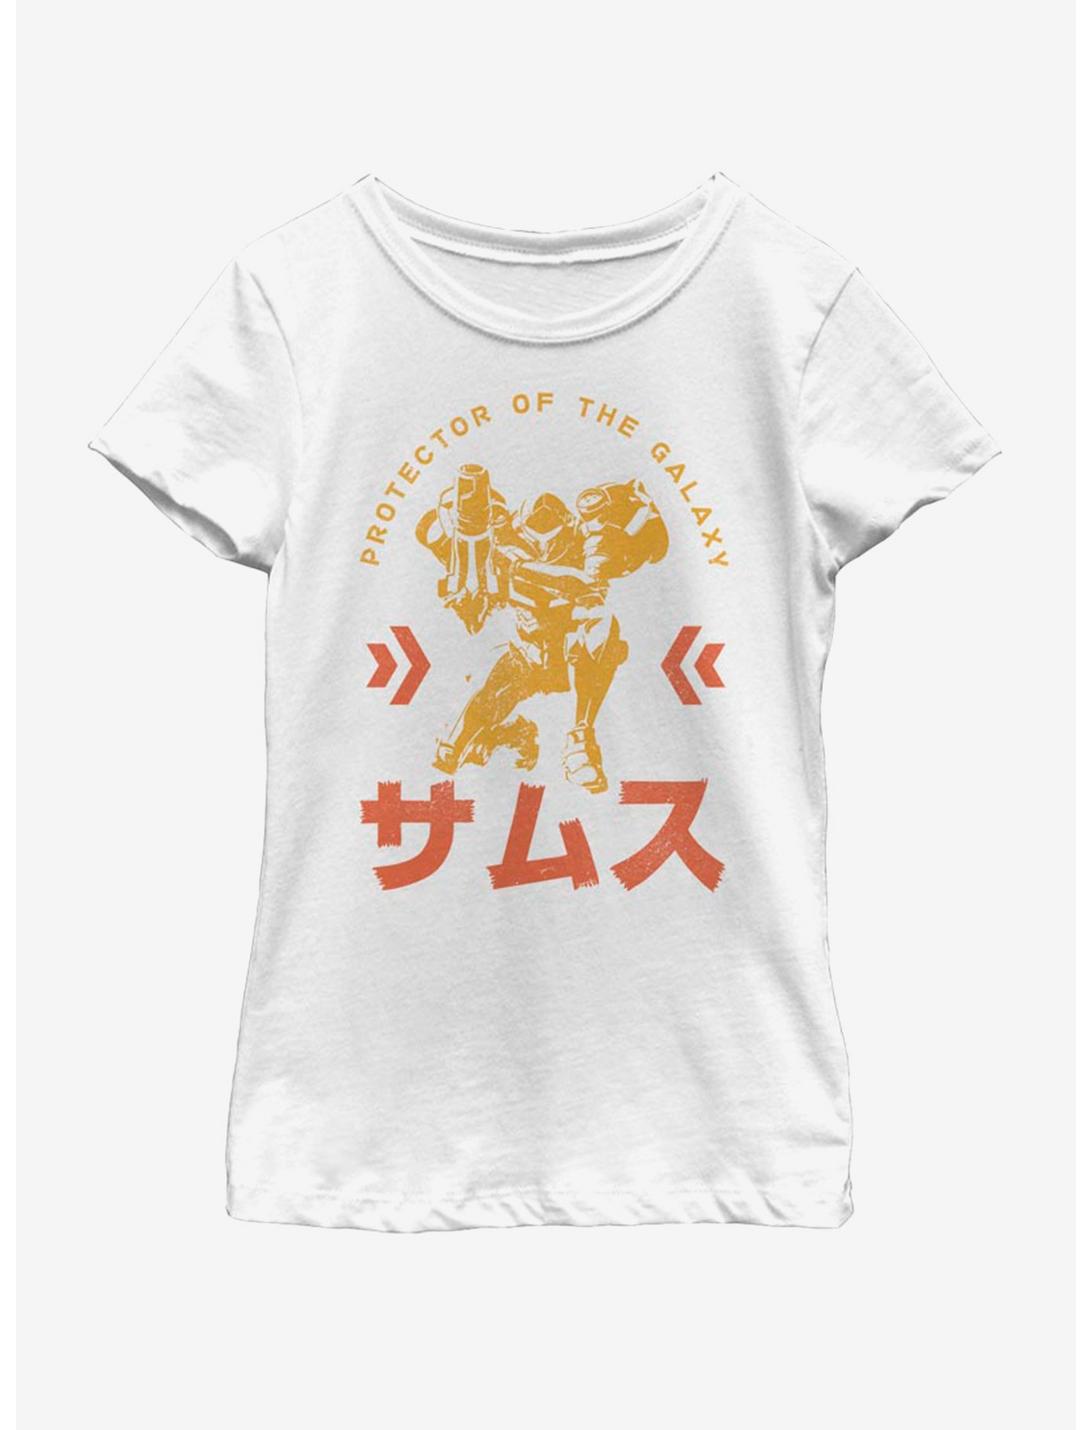 Nintendo Protector Of The Galaxy Youth Girls T-Shirt, WHITE, hi-res